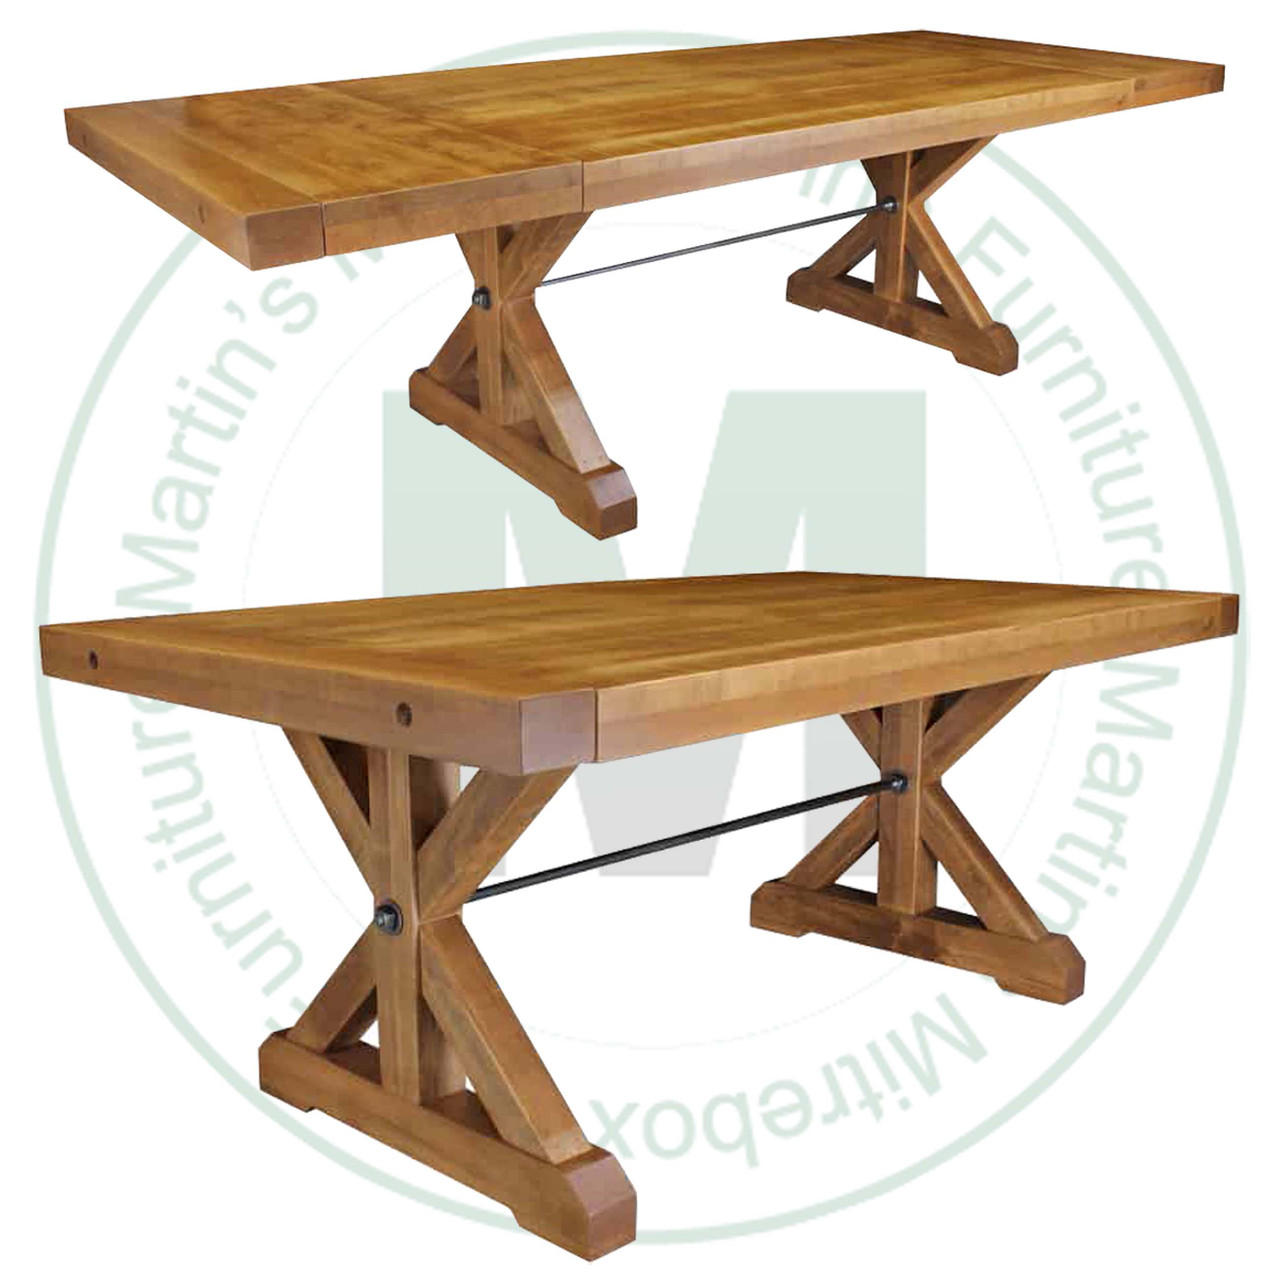 Maple Klondike Trestle Solid Top Table 36'' Deep x 84'' Wide x 30'' High With 2 - 16'' Leaves